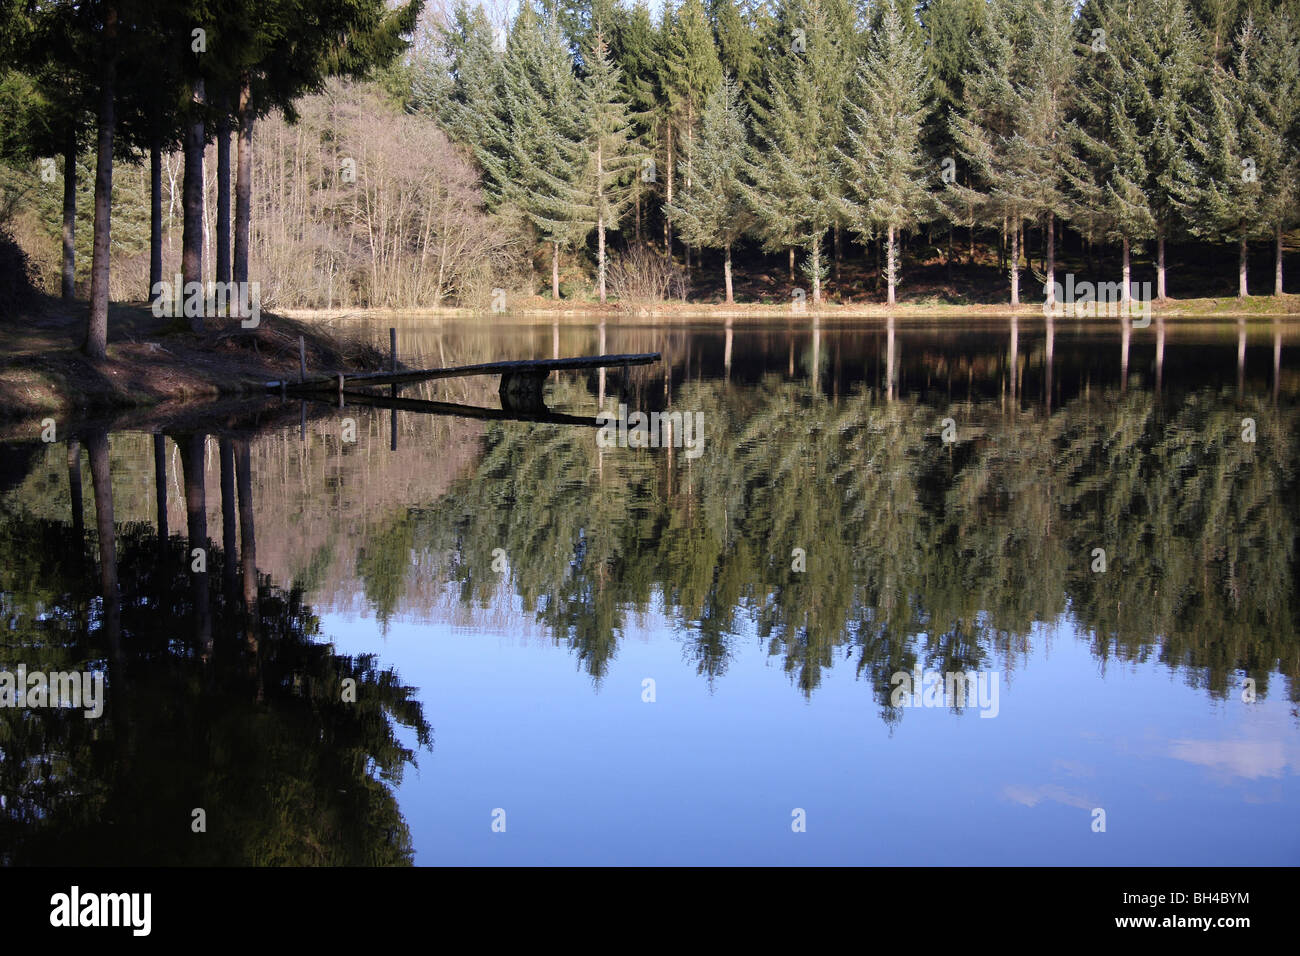 A small jetty in silhouette and row of pine trees reflected in water. Stock Photo